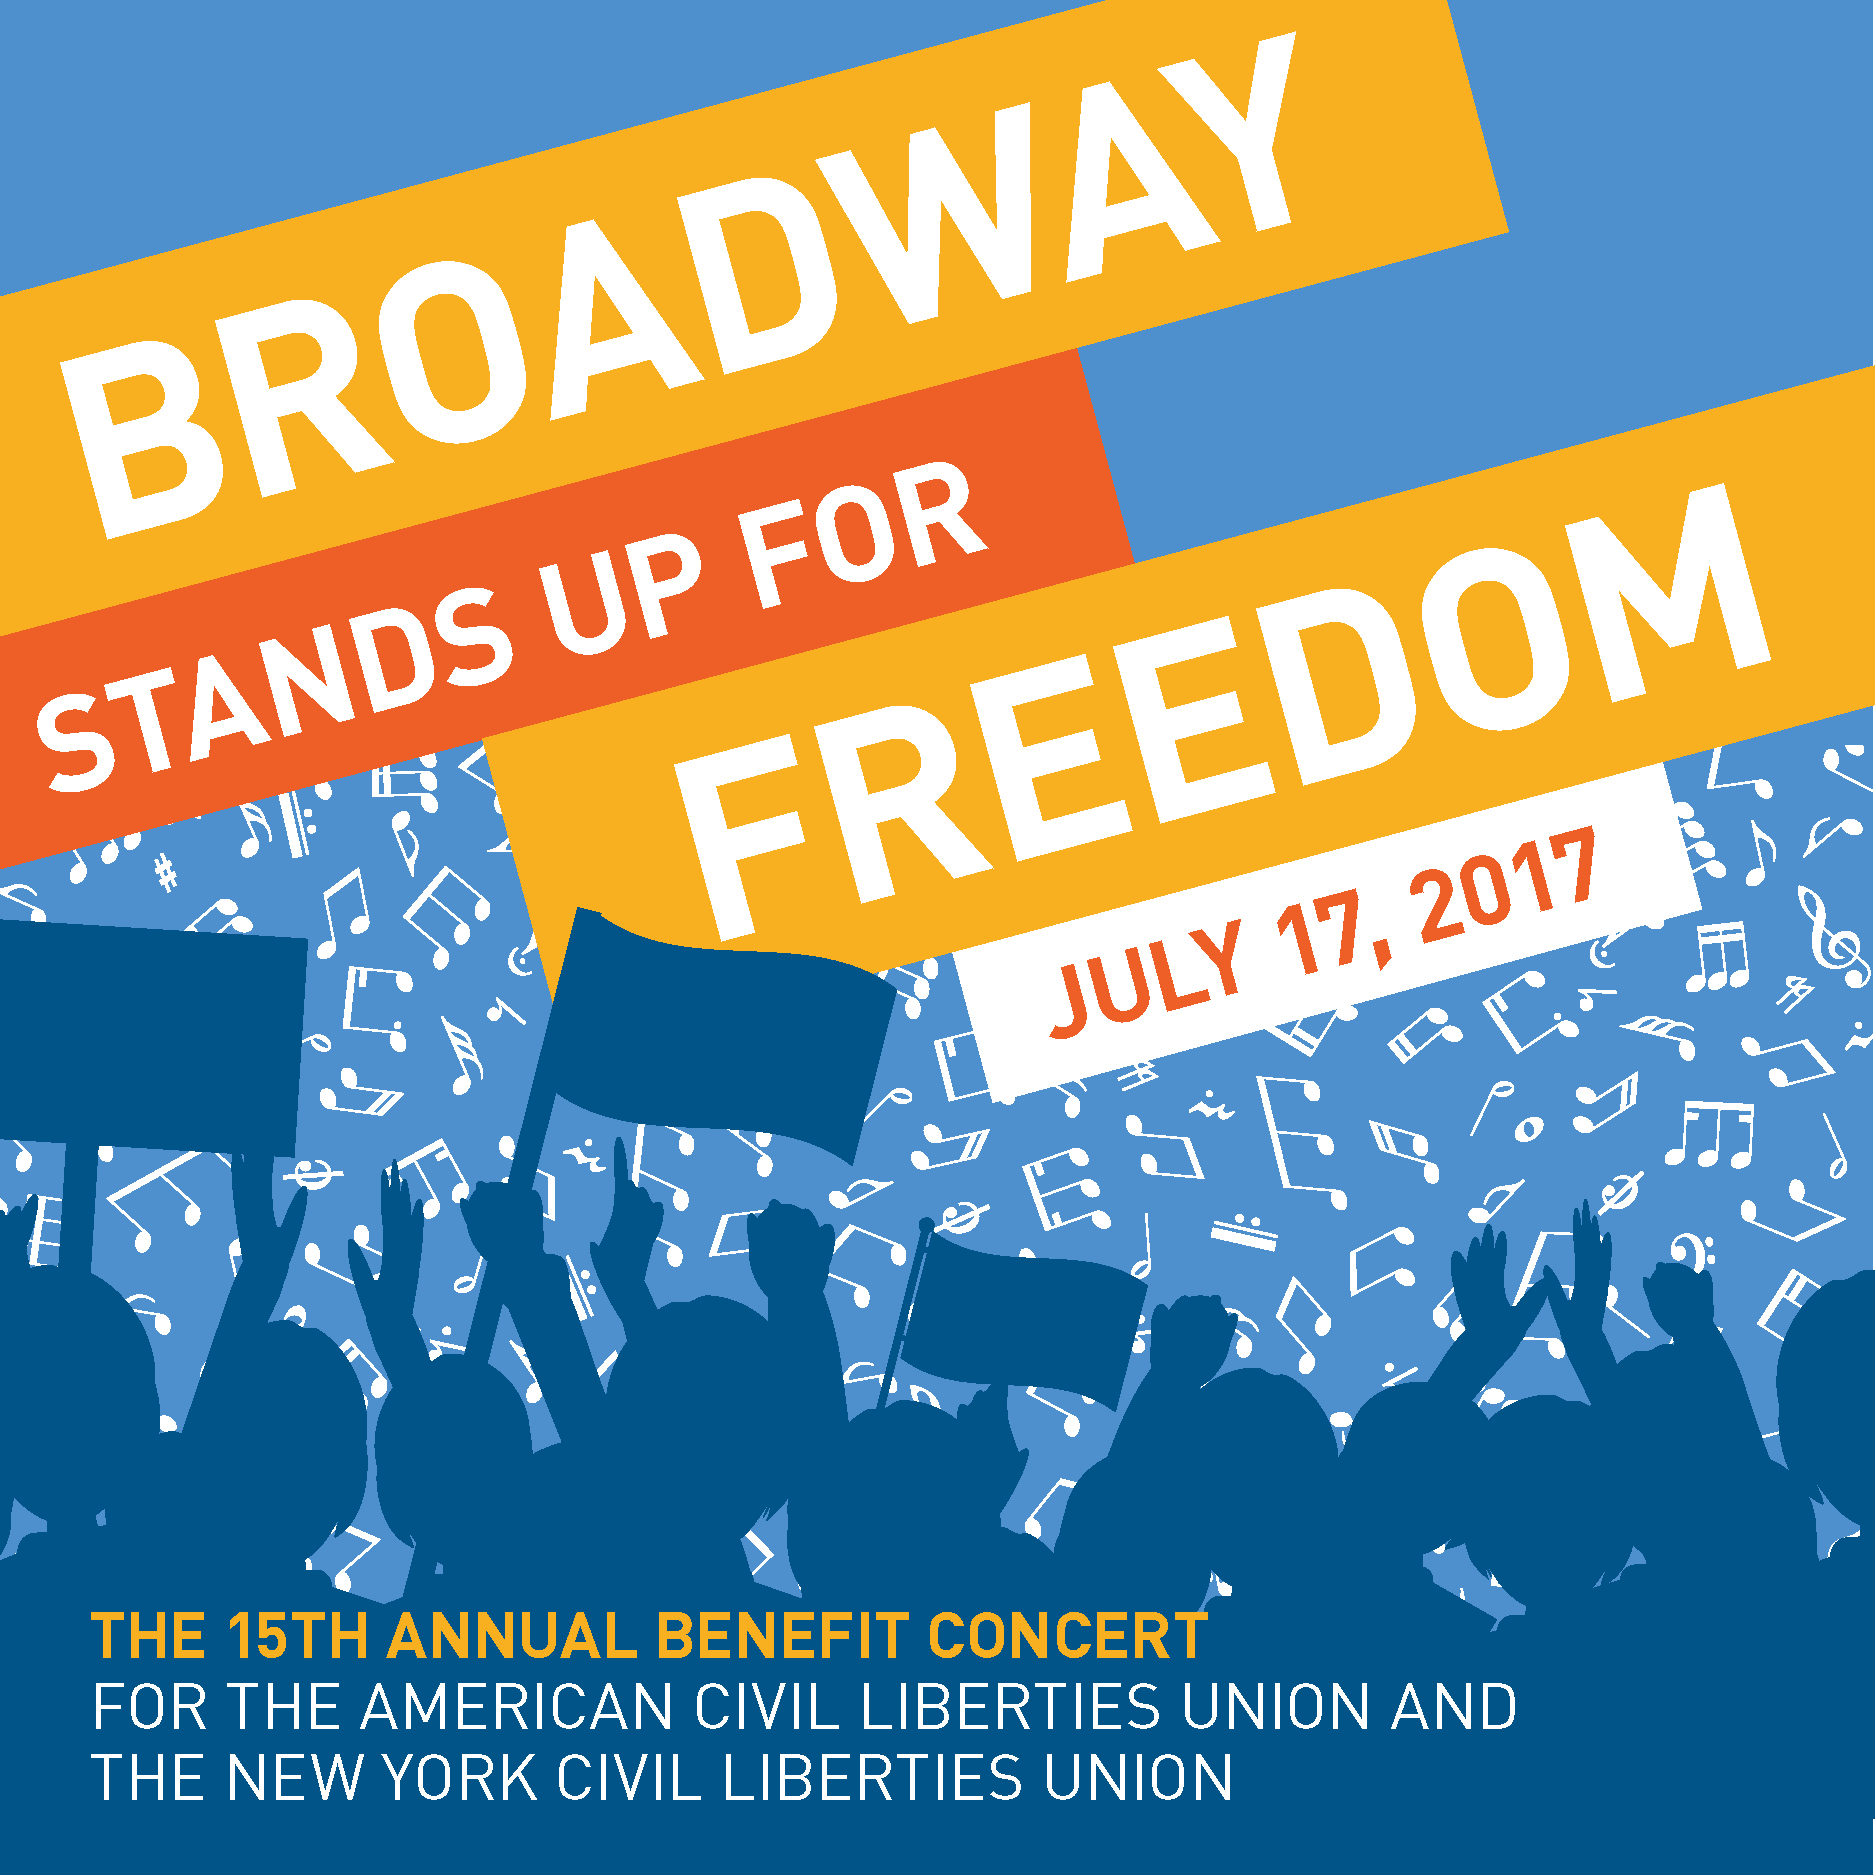 Broadway Stands Up for Freedom 2017